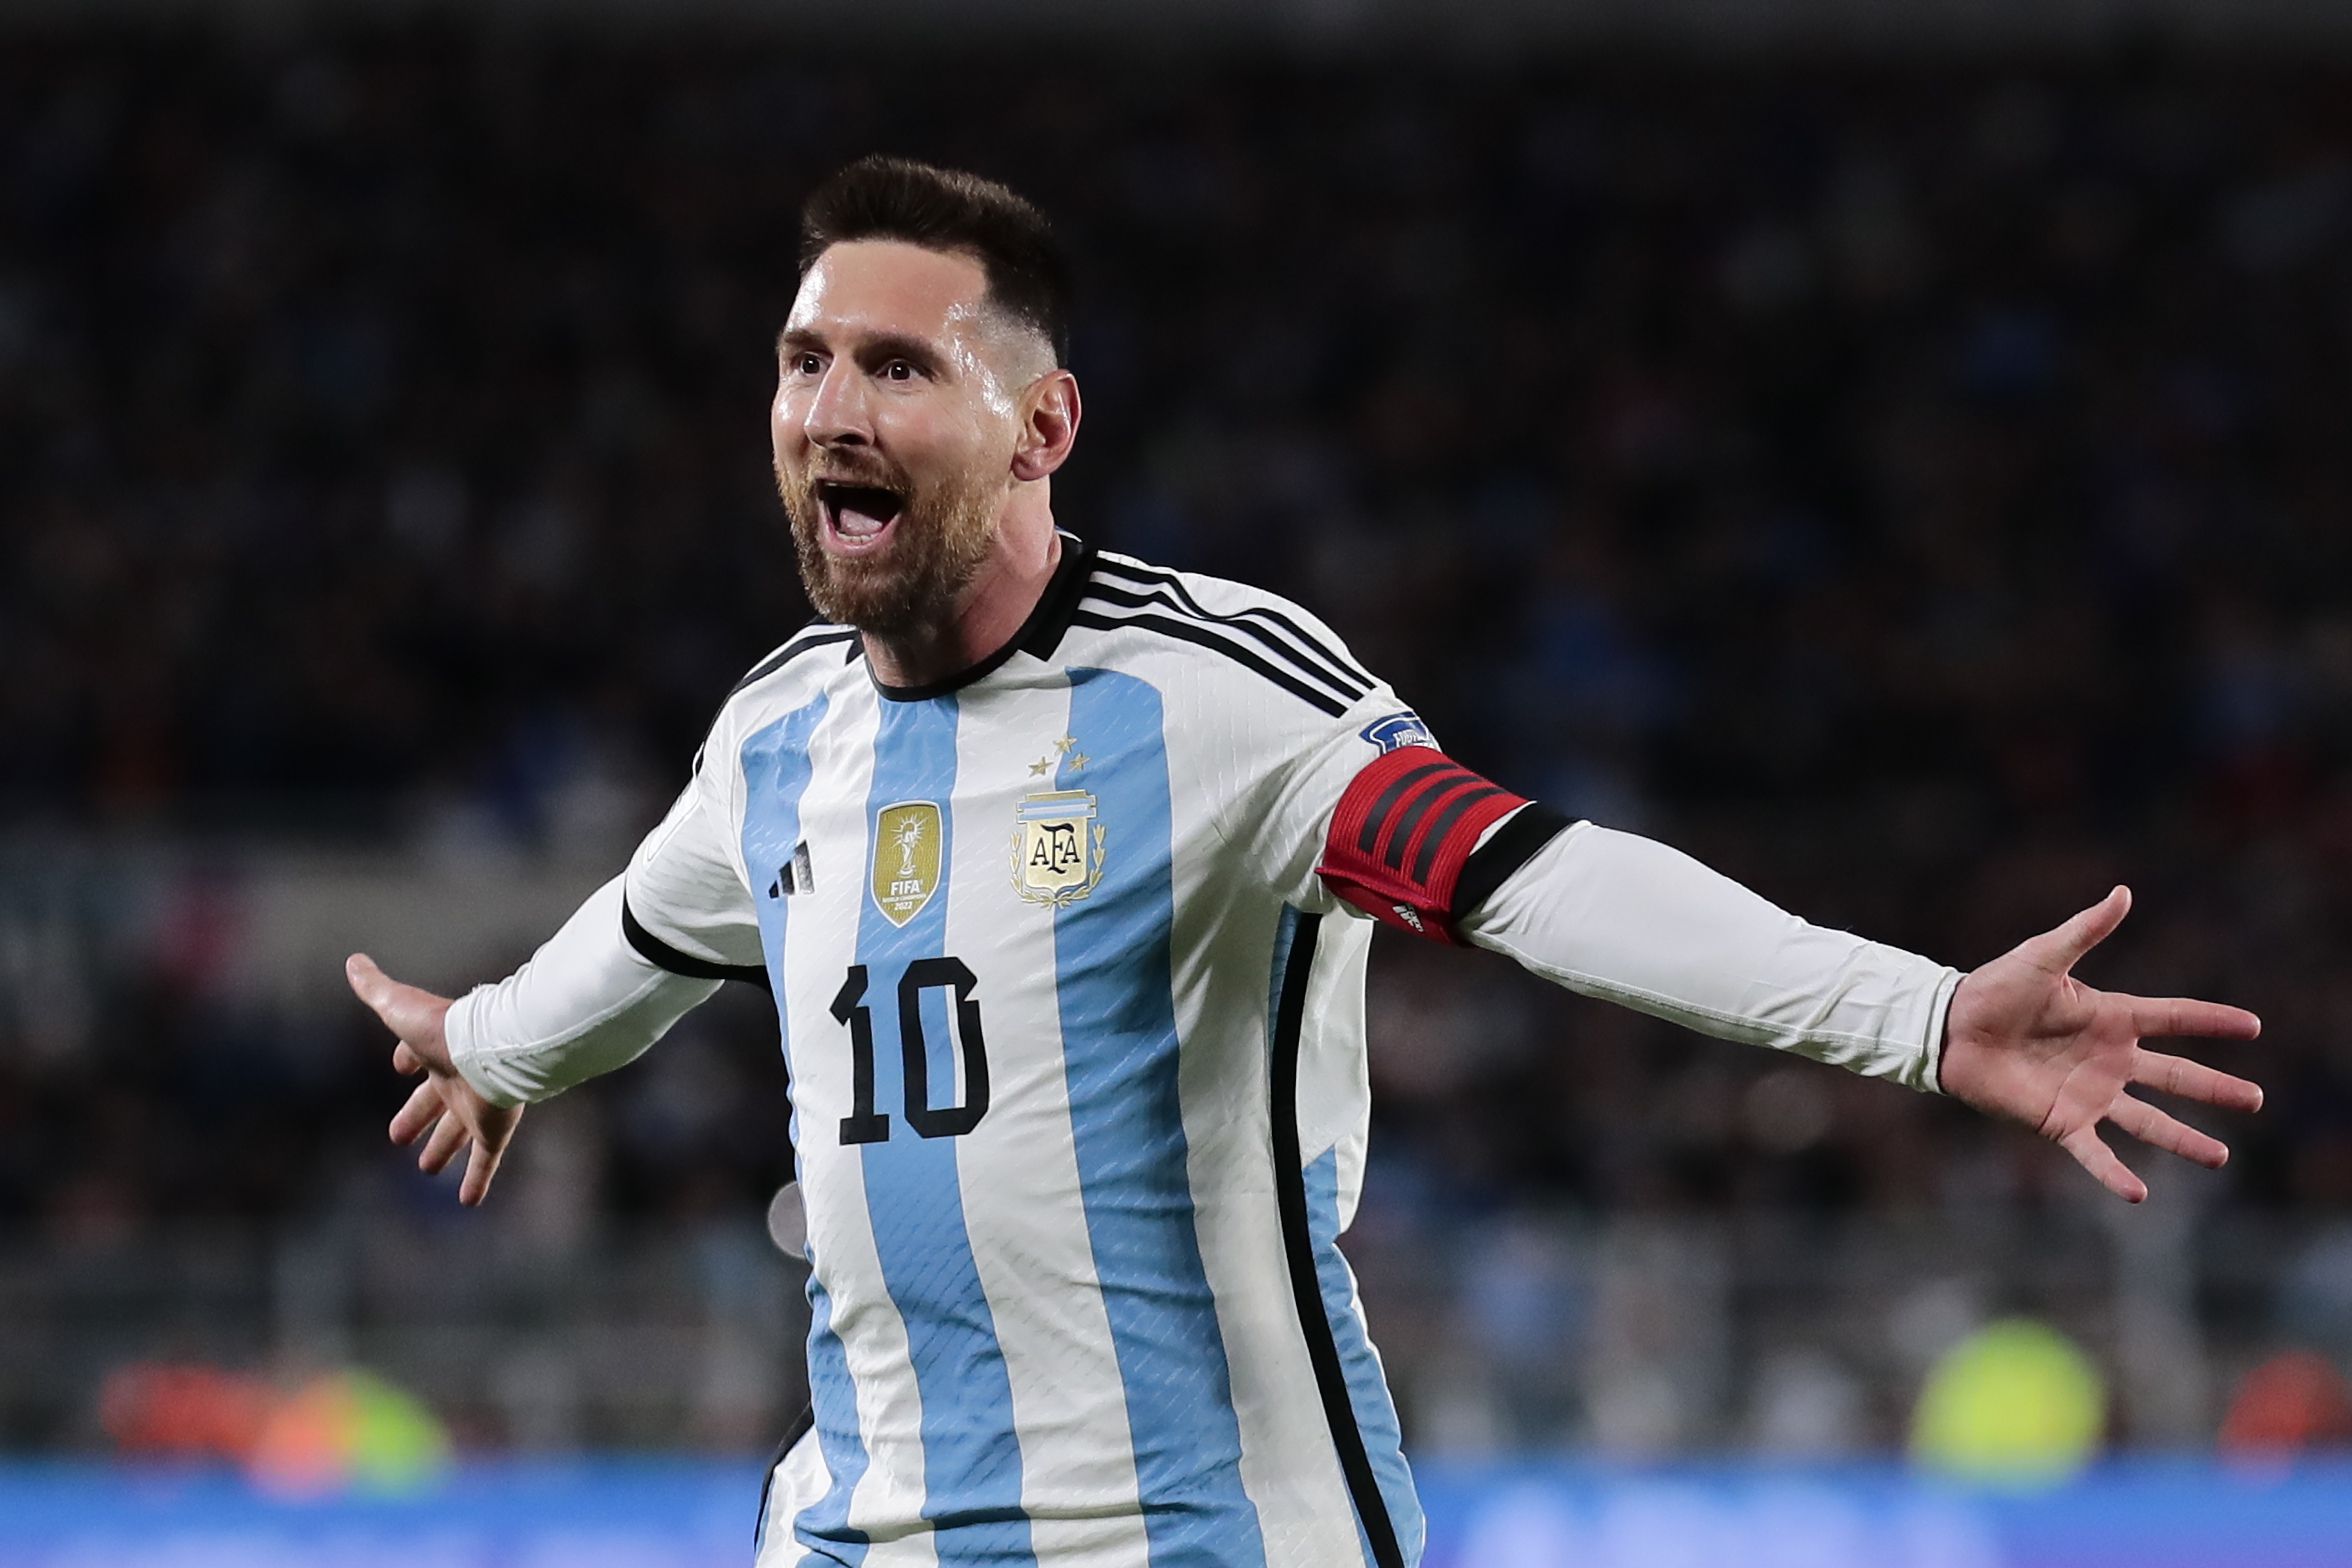 Early Argentina team news: will Lionel Messi start?